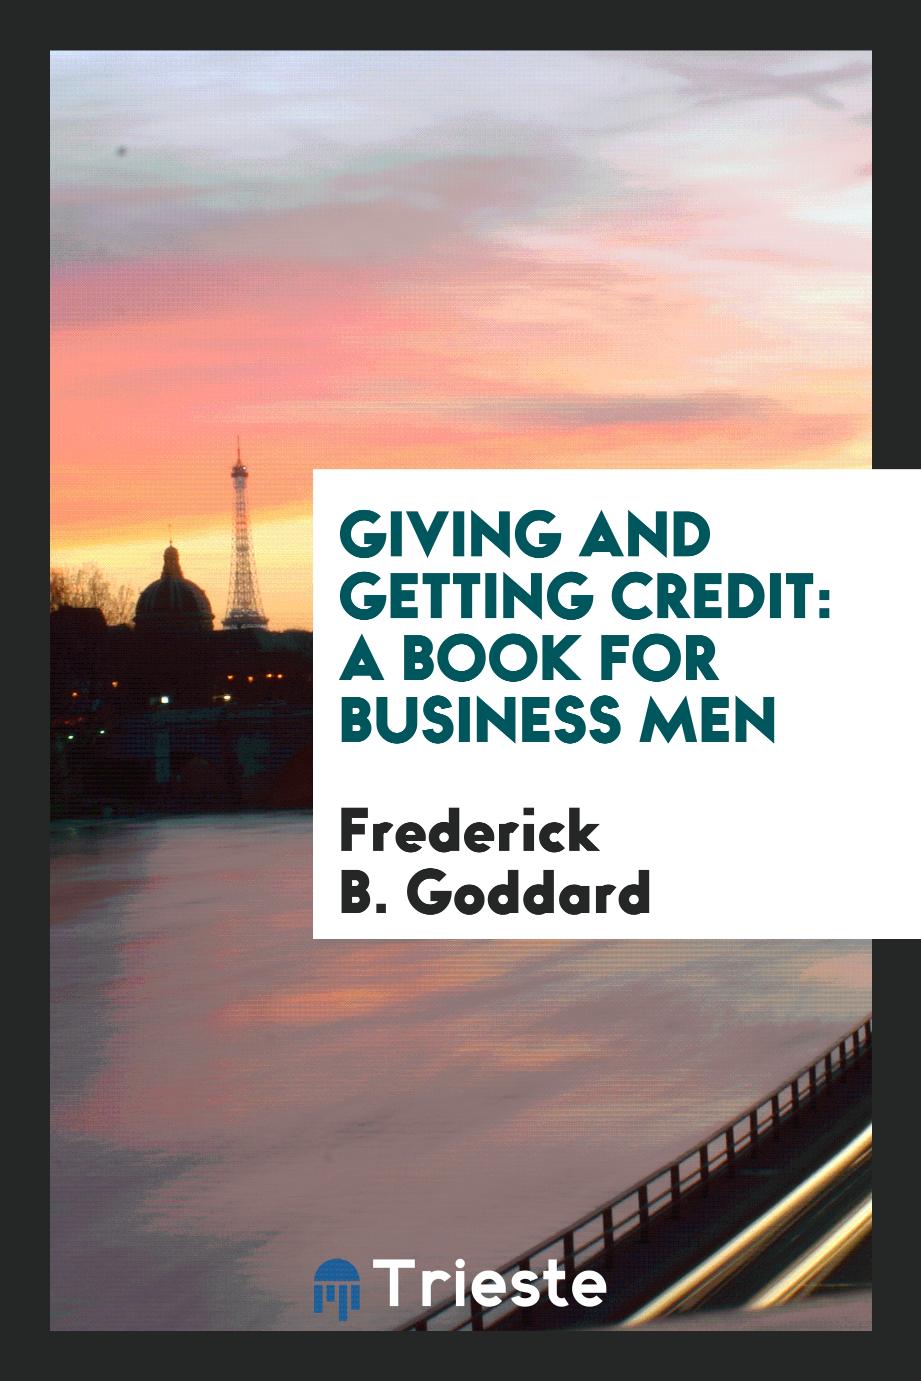 Giving and getting credit: a book for business men